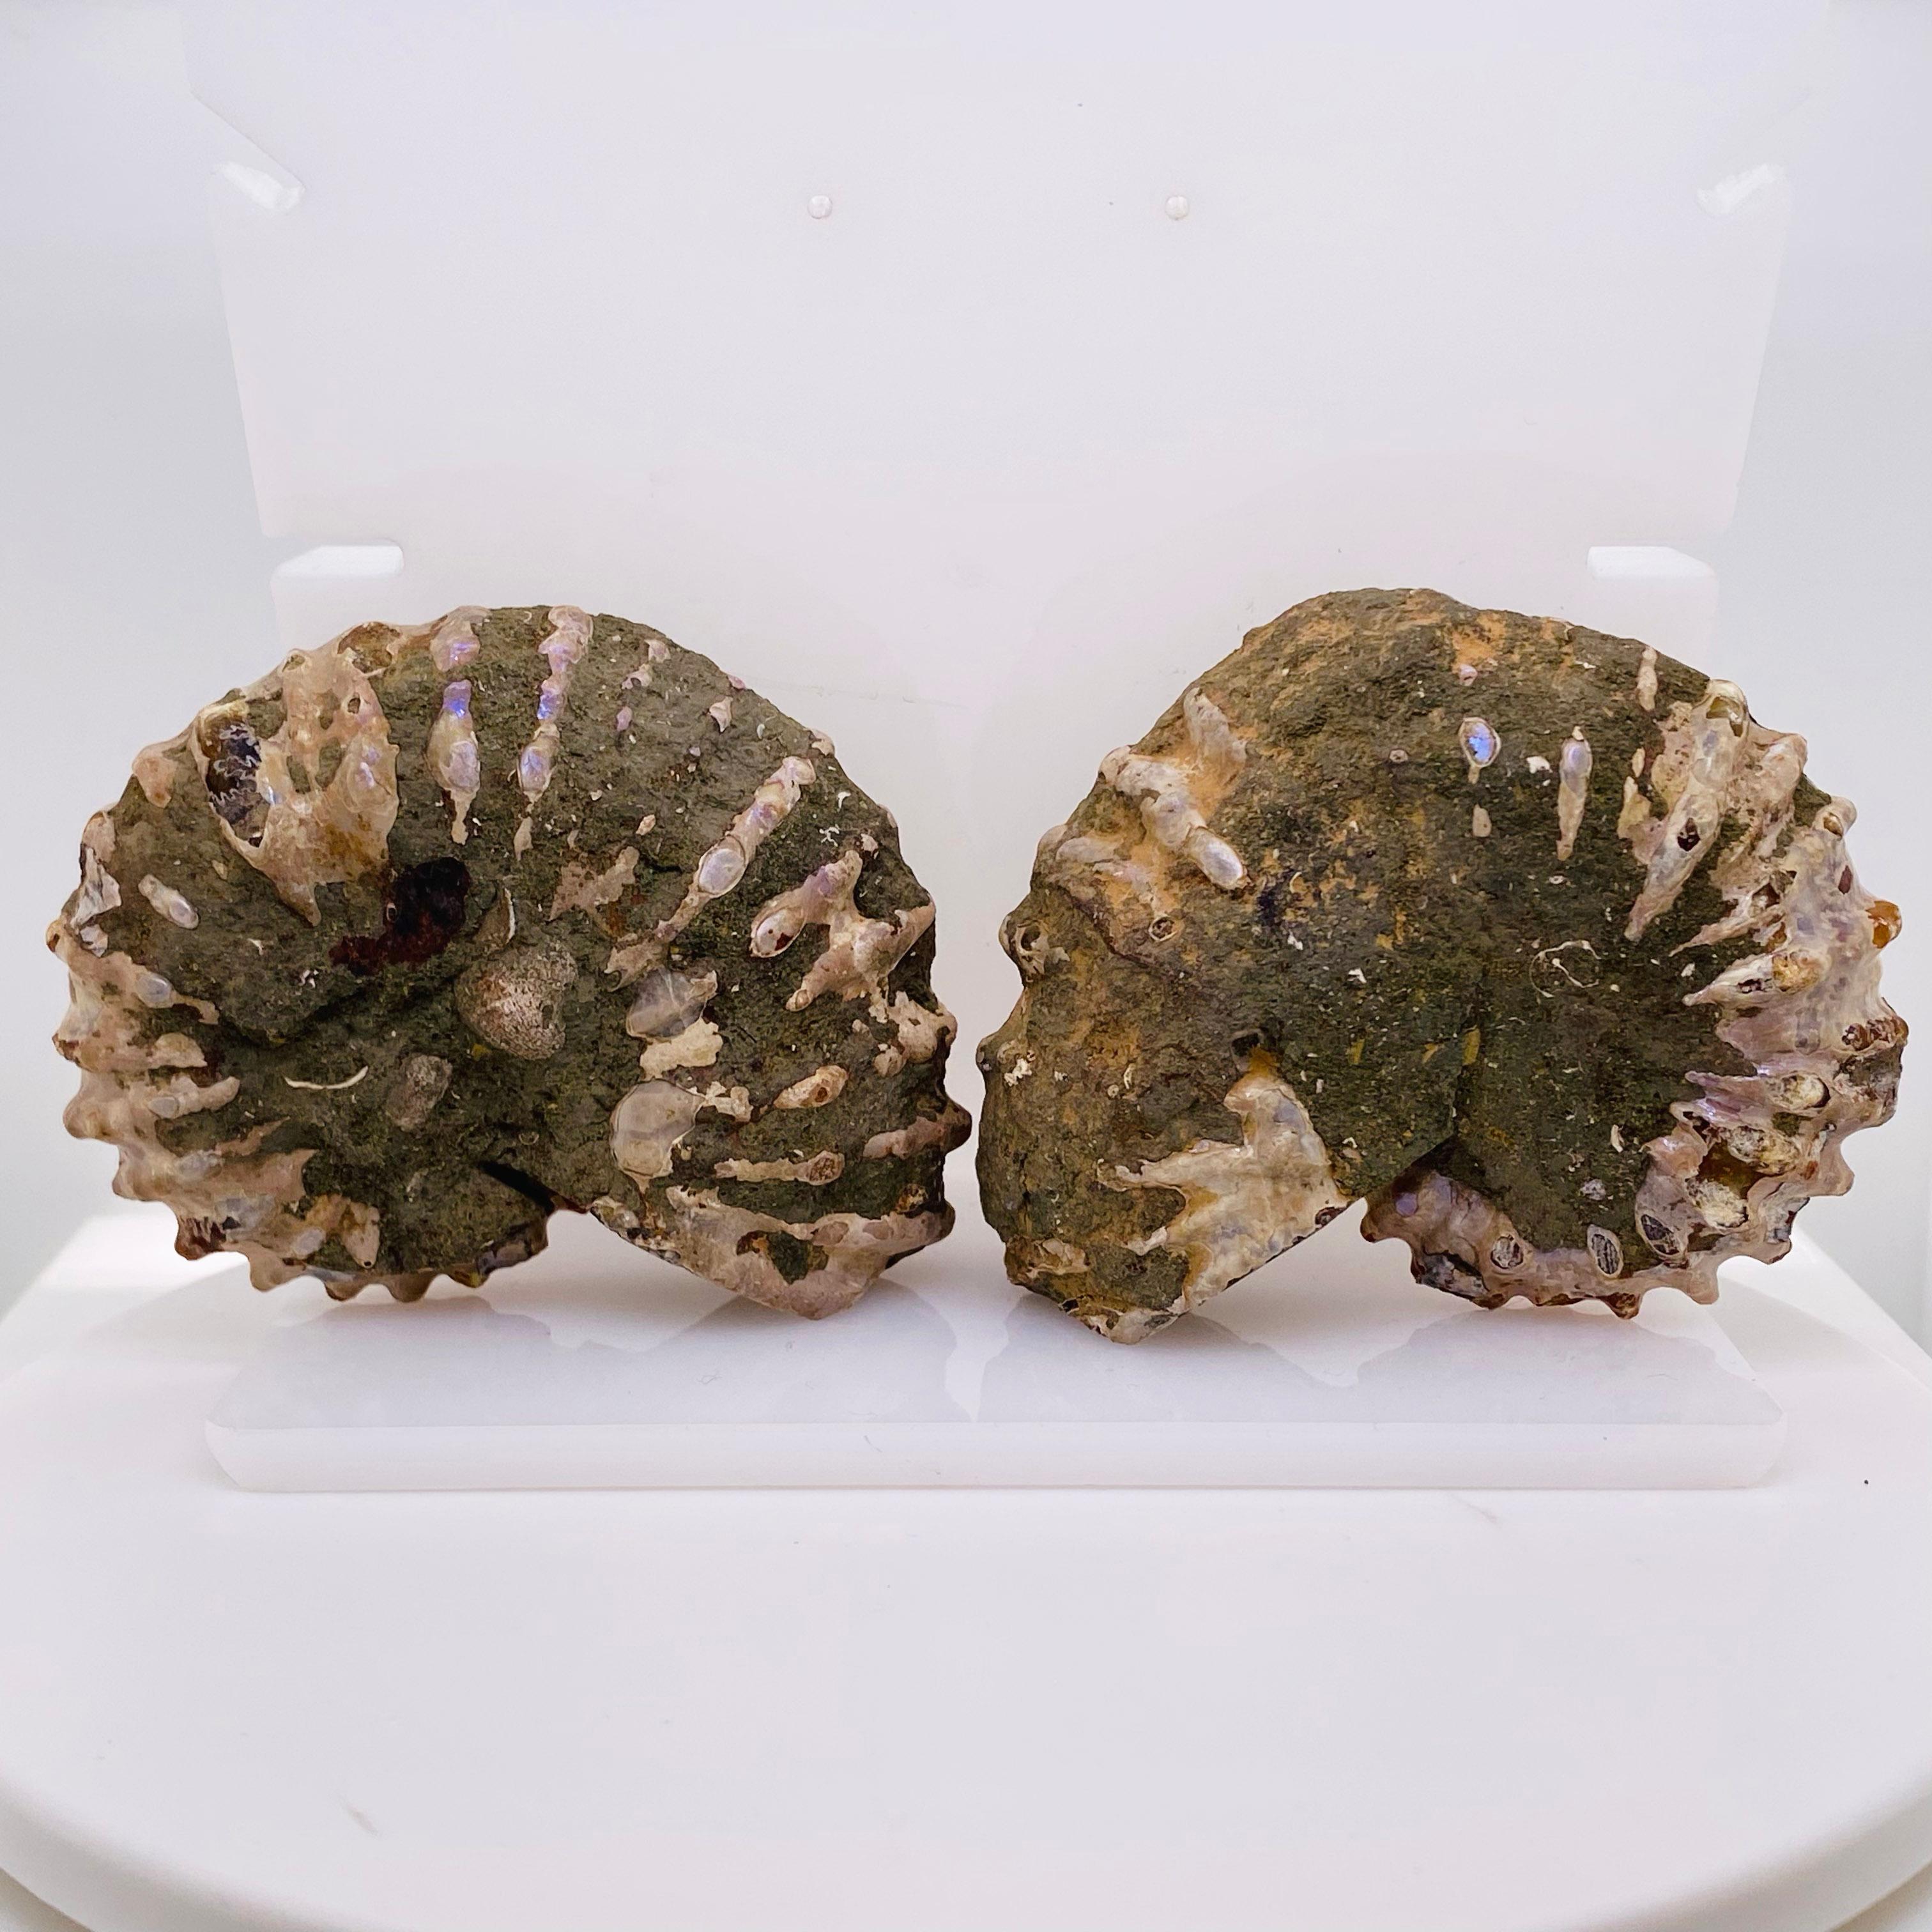 The history of an Ammonite dates back 400 million years ago during the Jurassic period when this marine animal once roamed the oceans. Since their extinction, Ammonite has been searched for as buyers are fond of their natural beauty and district